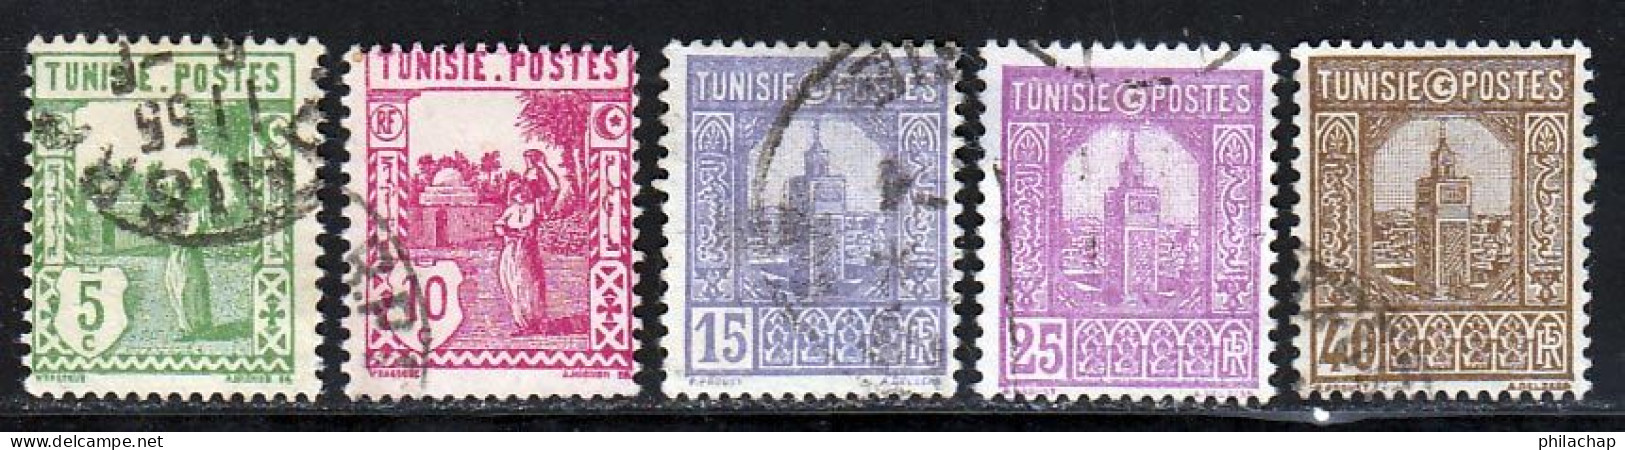 Tunisie 1926 Yvert 123 / 125 - 128 - 131 (o) B Oblitere(s) - Used Stamps